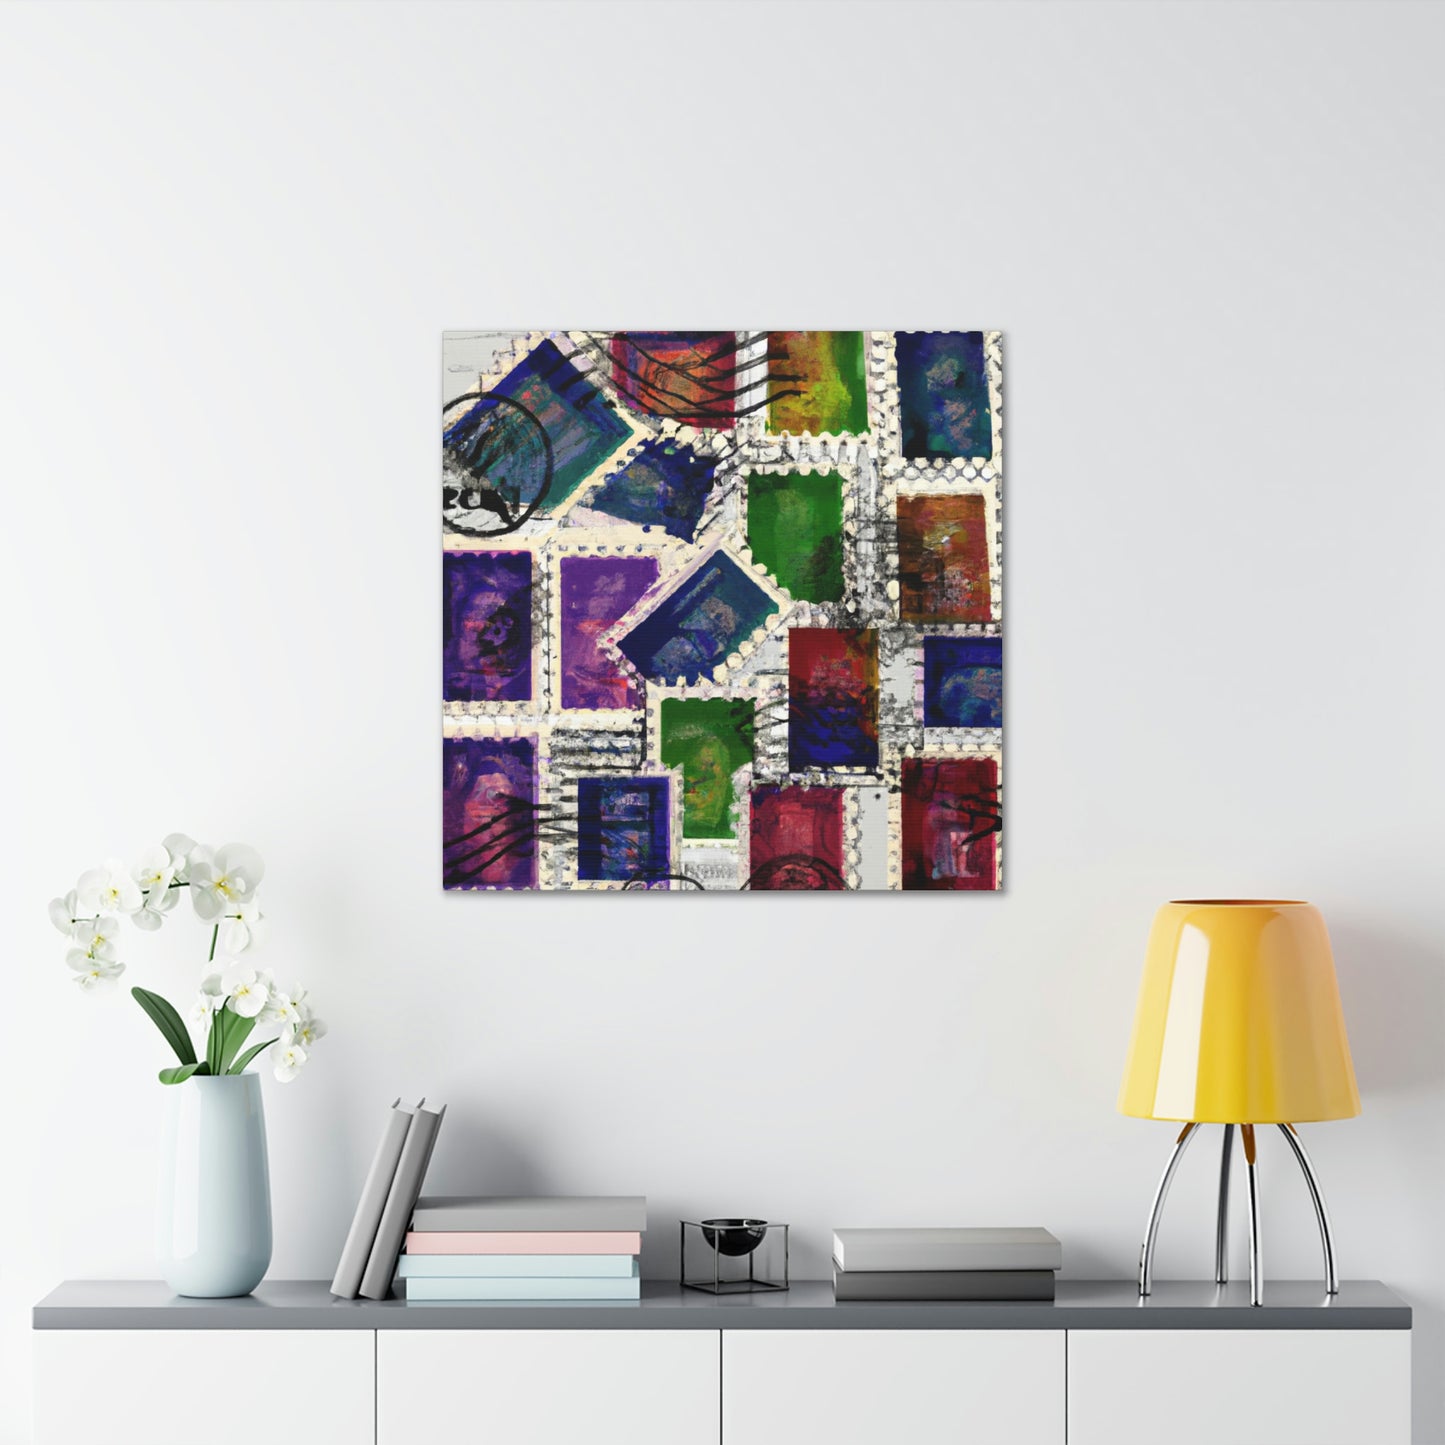 "Wonders of the World" Stamps - Postage Stamp Collector Canvas Wall Art